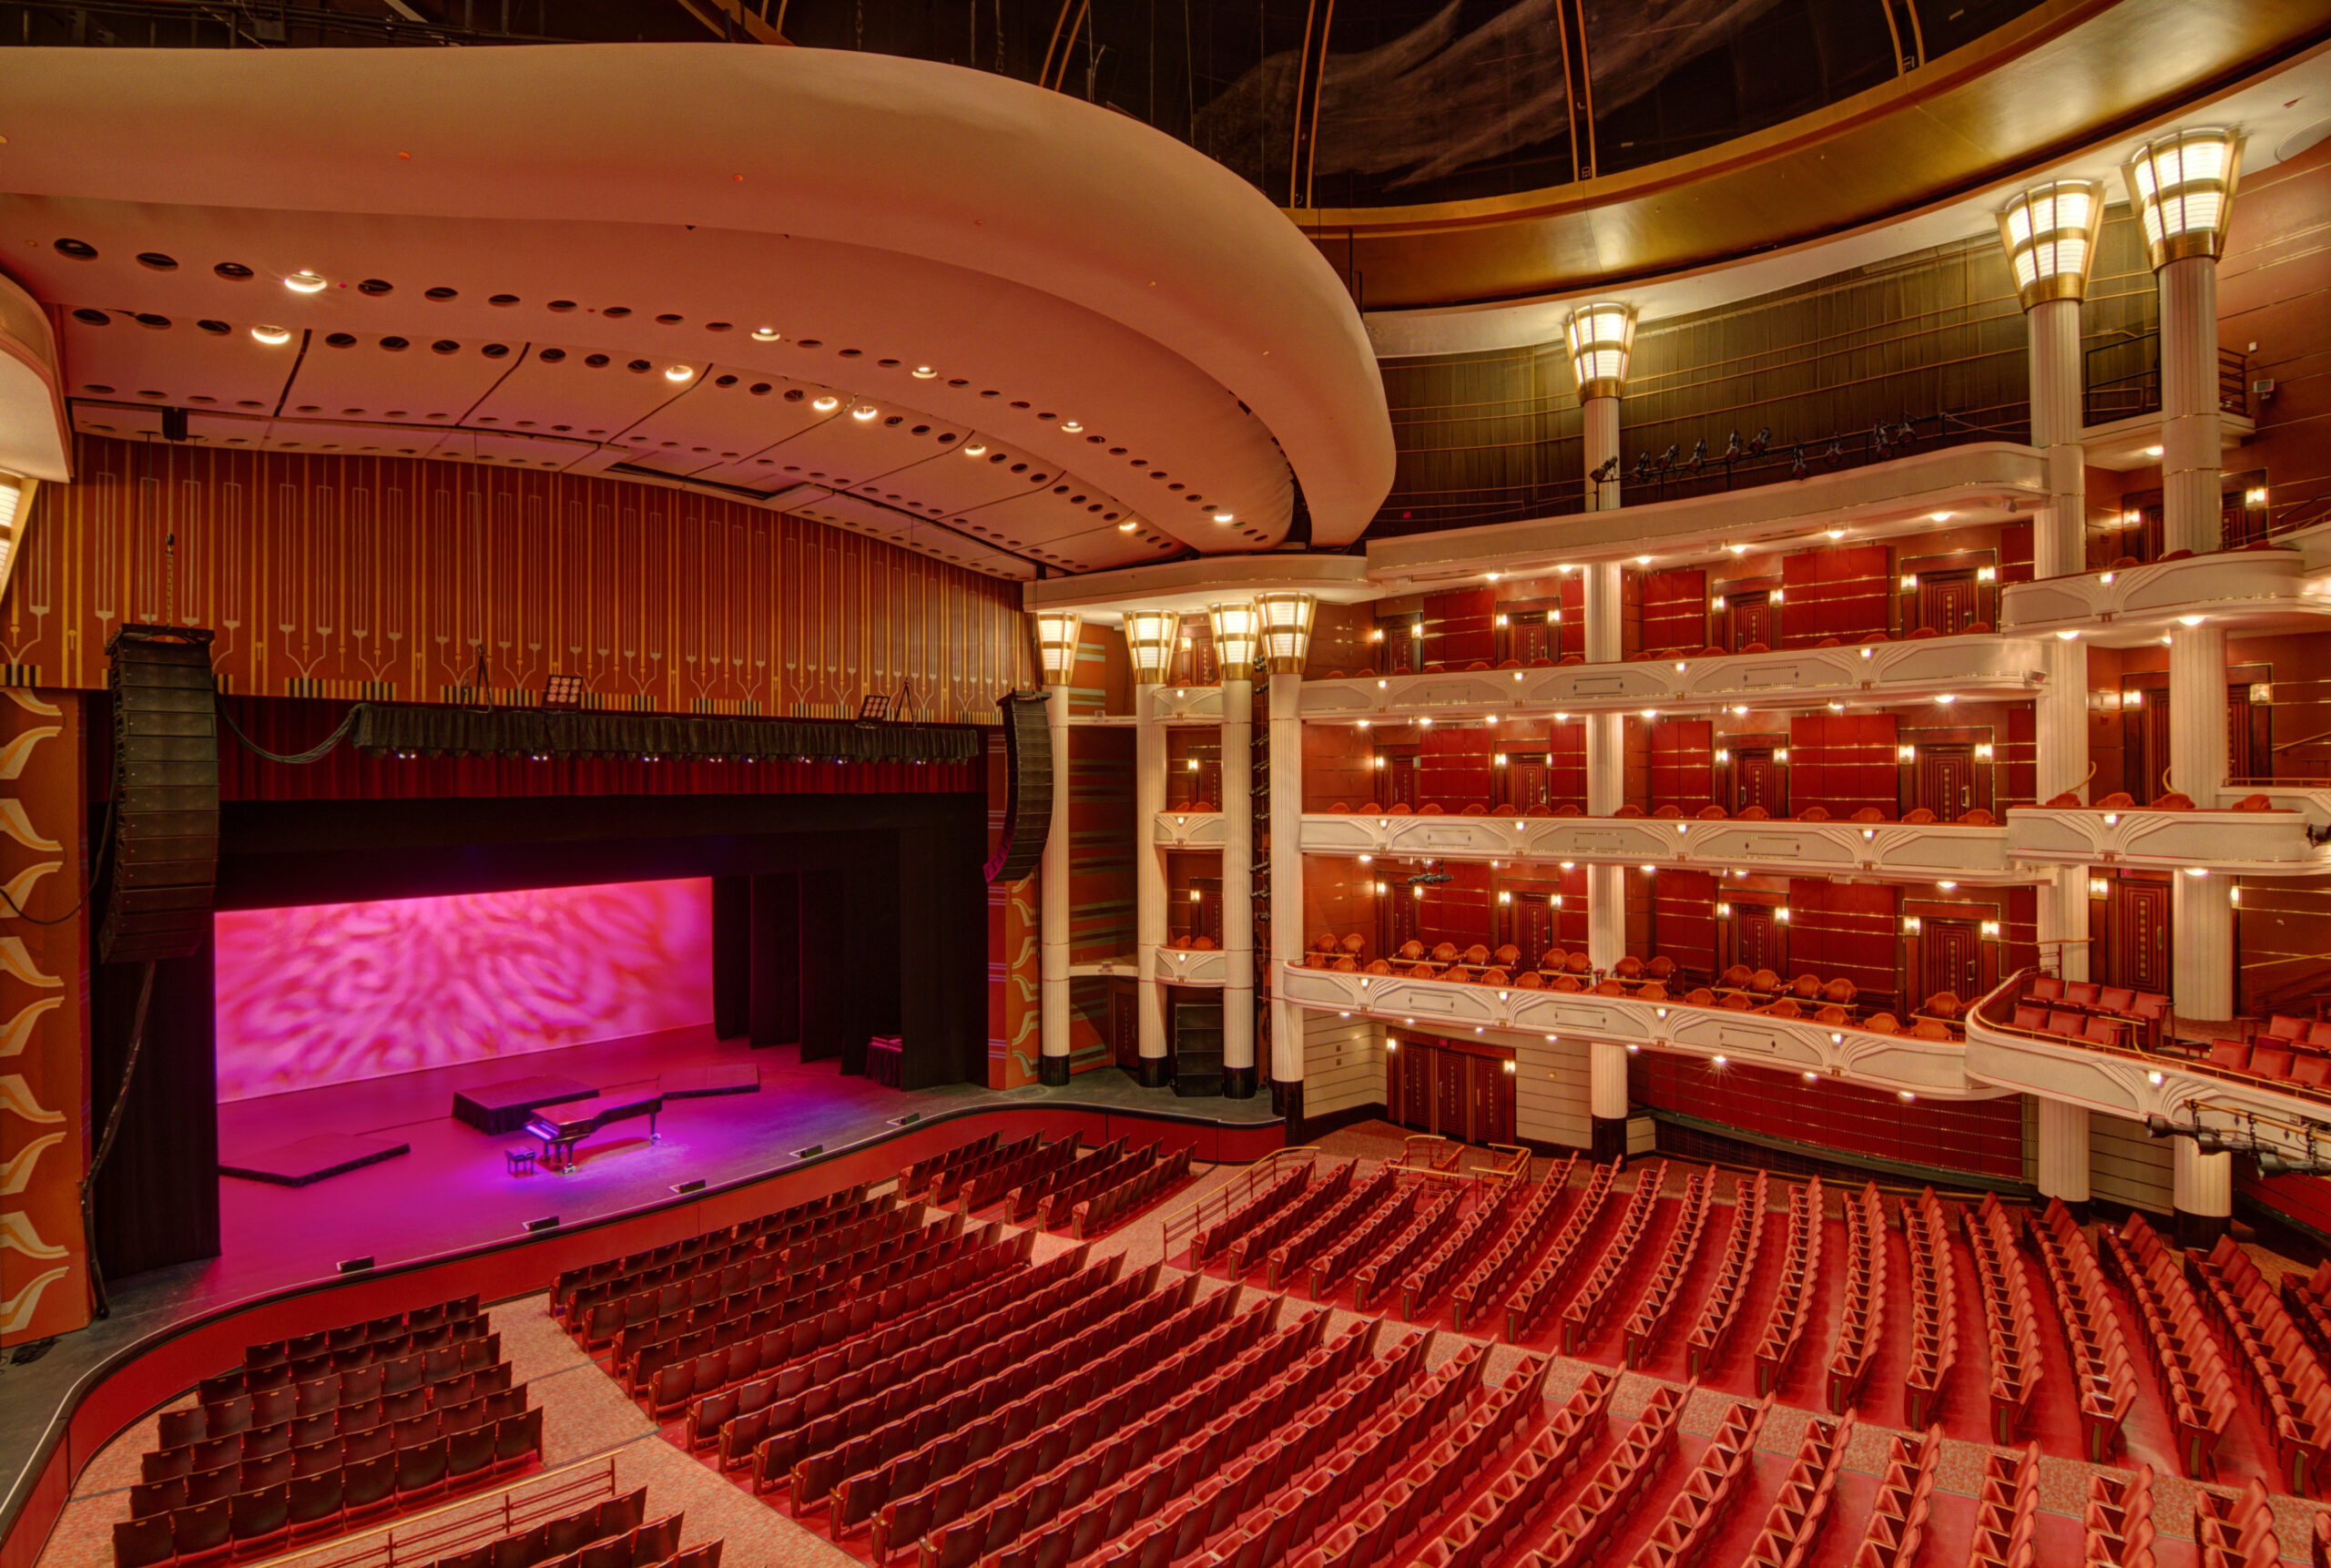 Kravis Center Schedule 2022 Regional Arts Music “At Eight” And Music “At Two” Classical Concert Series  - Luxury Guide Usa